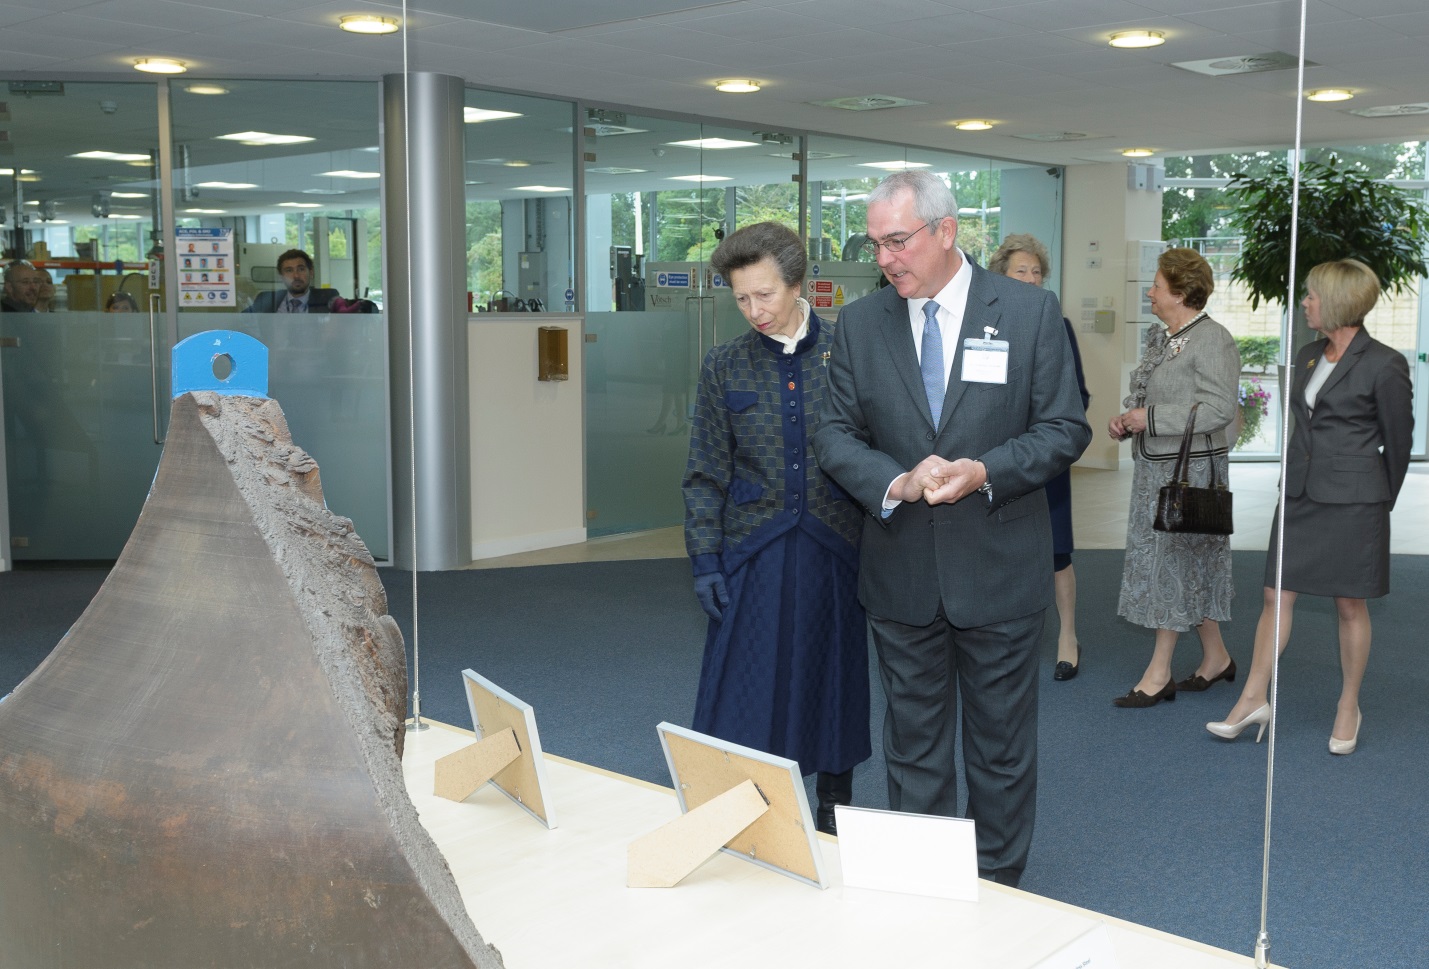 The piece of the brittle fracture preserved at TWI, being shown to Princess Anne in 2015